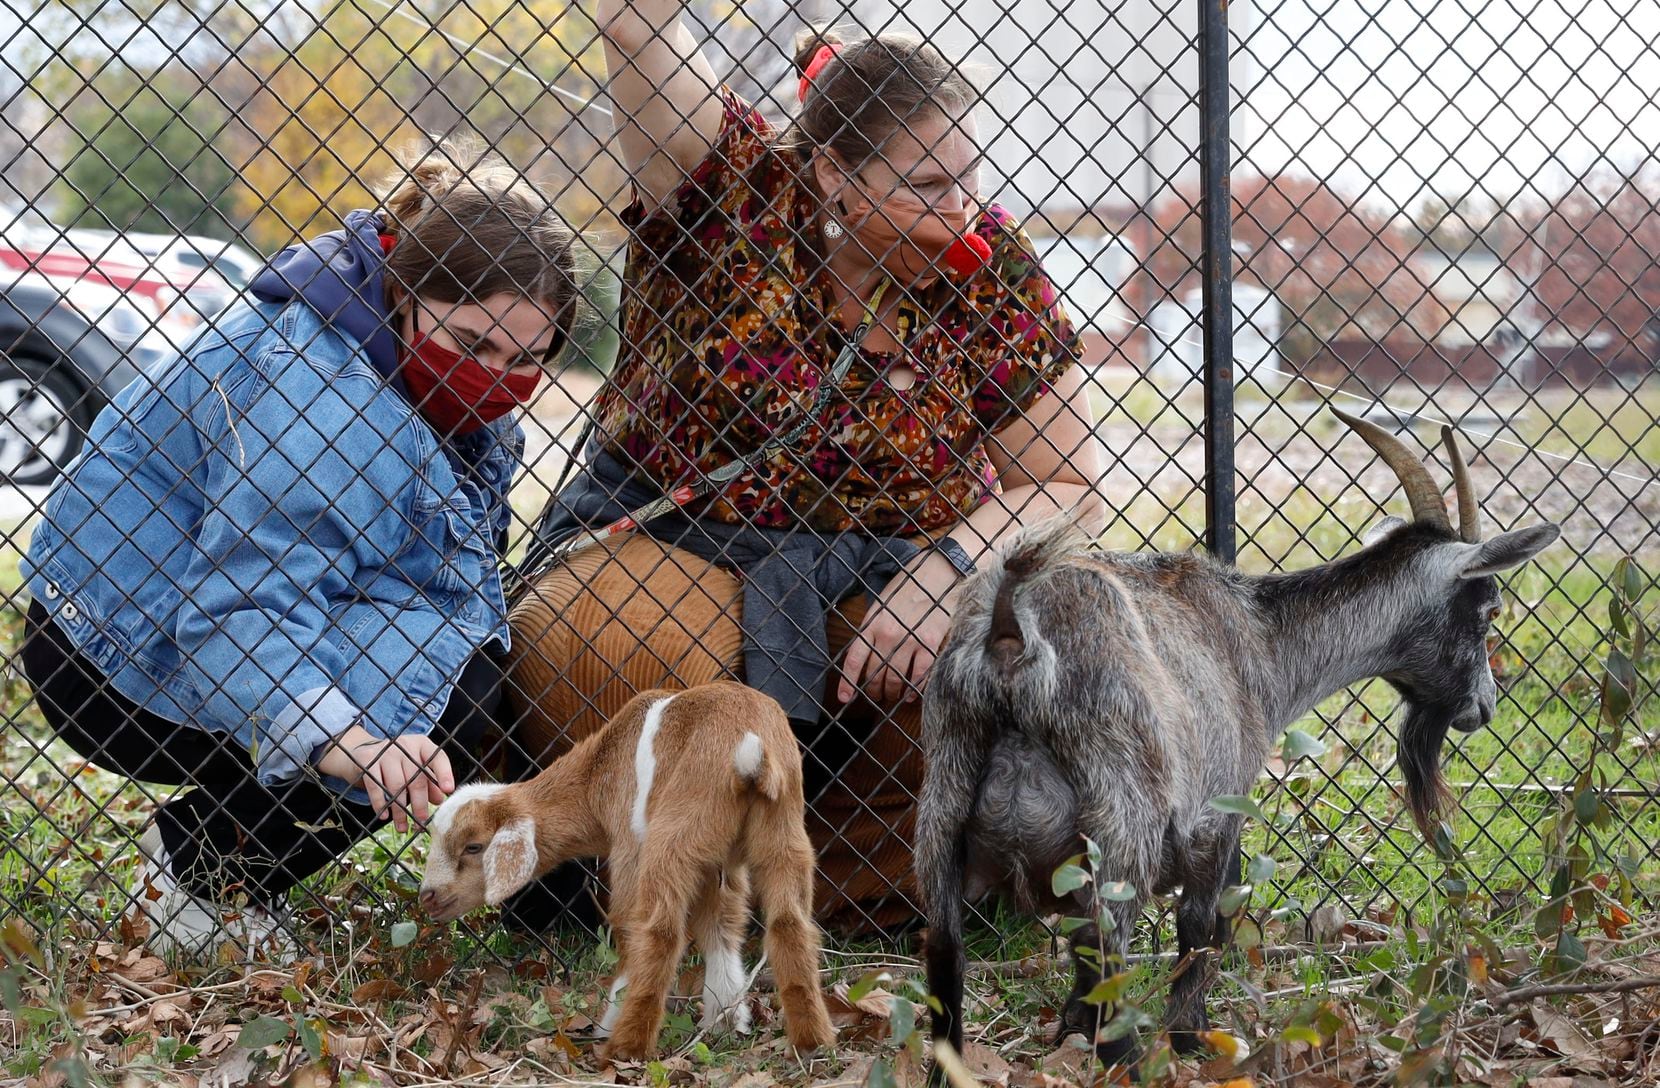 Jordan and Karen Ishee watch the goats Vanessa Reams brought to Dentonpalooza in Denton on Friday, December 3, 2021. Buddy, the goat Jordan is watching, is 3 weeks old.  This is the first year that the event has taken place. 